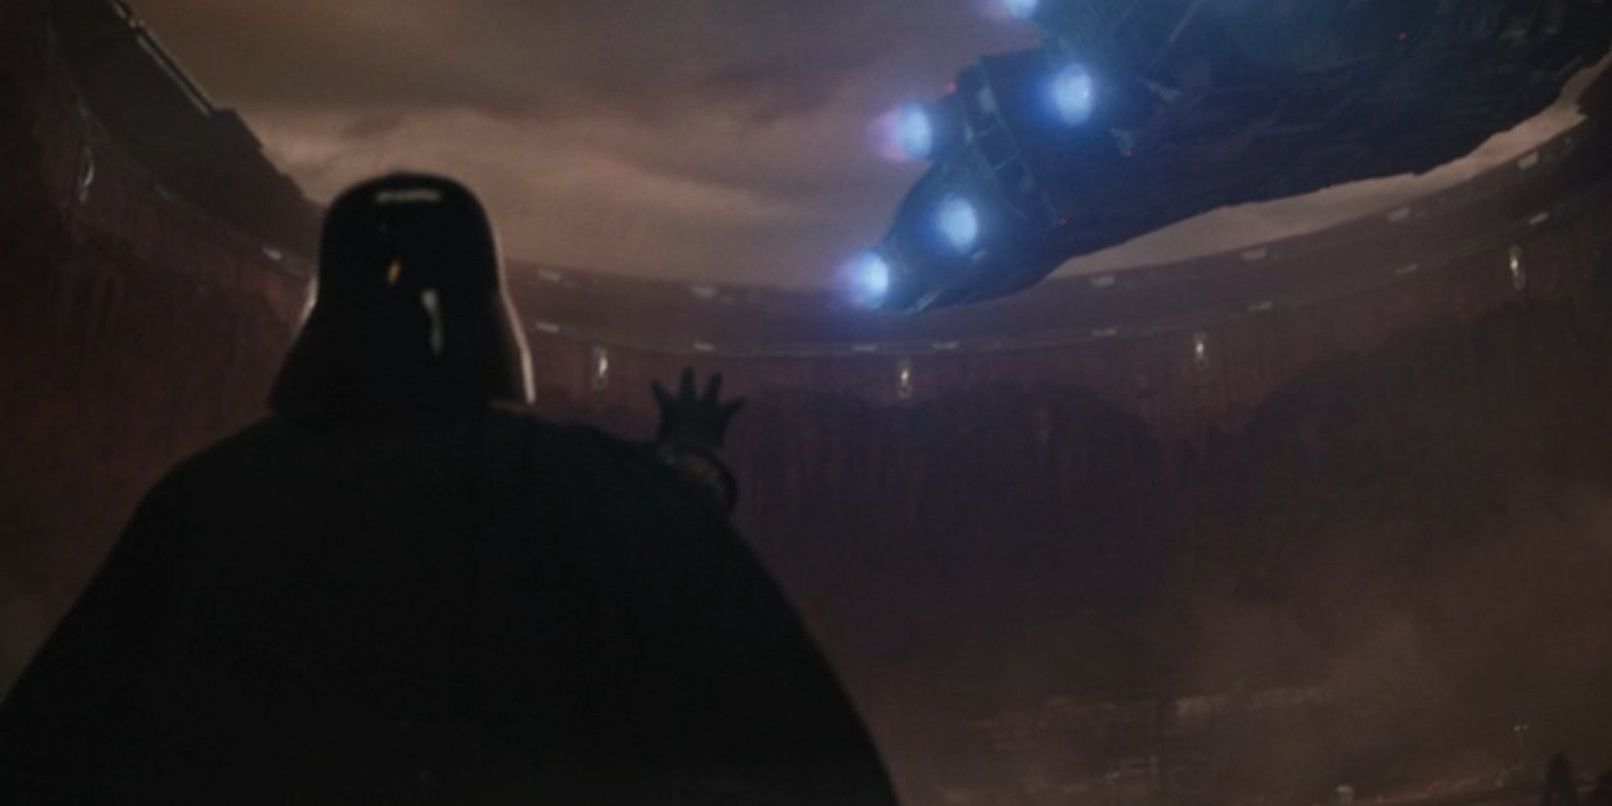 darth vader using the force to bring down a ship